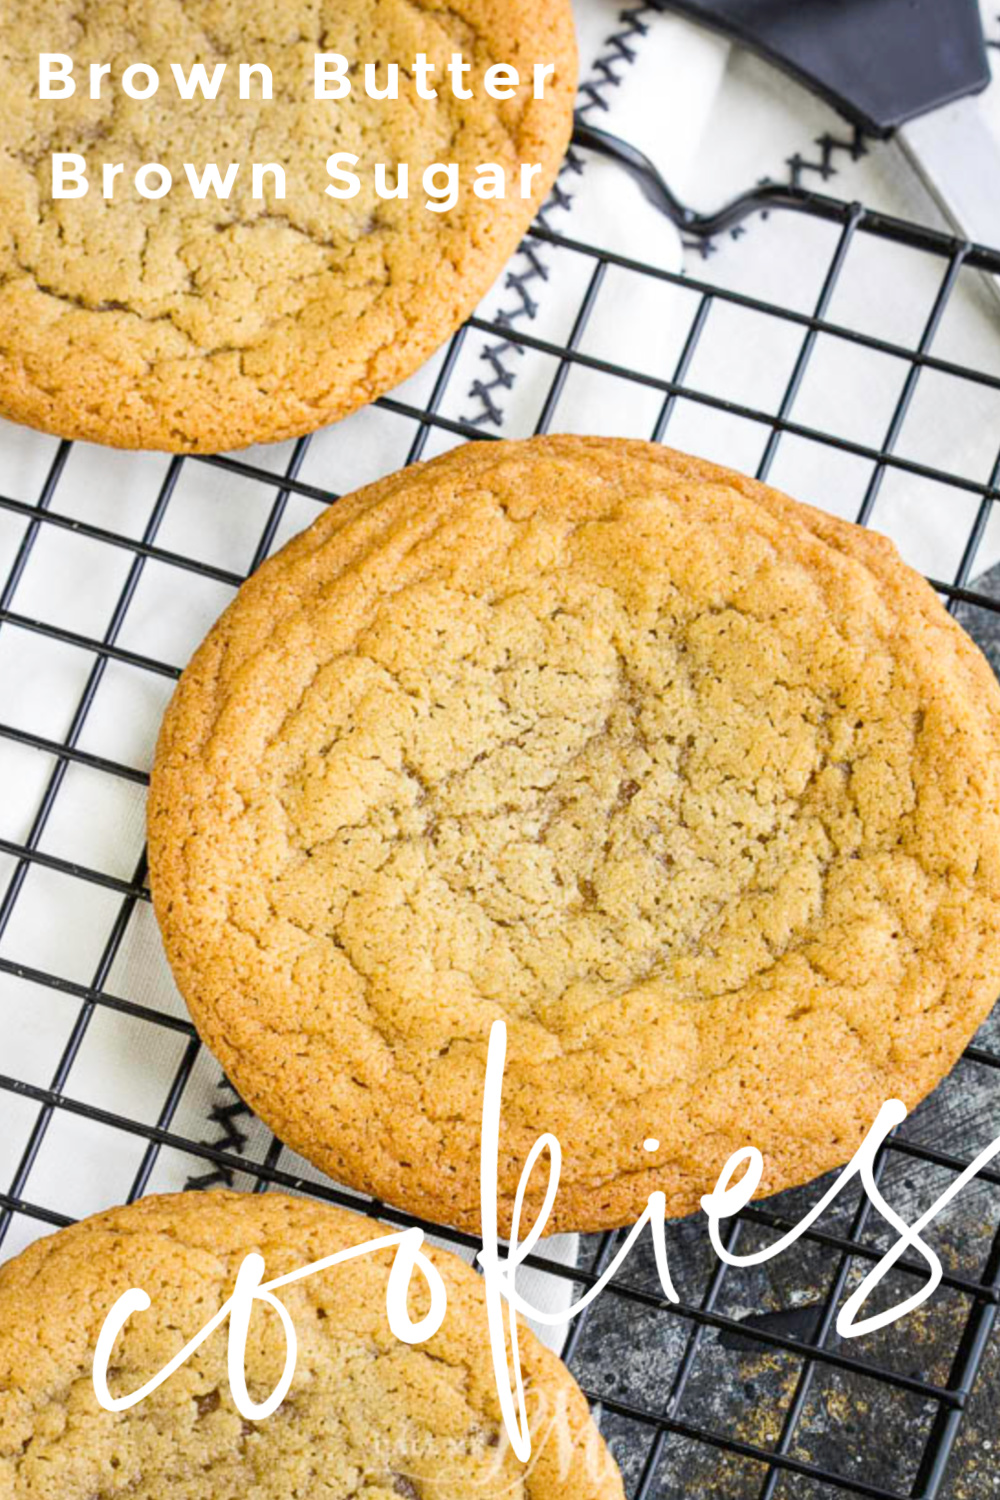 Crunchy around the edges with chewy centers, Browned Butter Brown Sugar Cookie Recipe is packed full of flavor! Cookie perfection! #brownsugar #brownbutter #cookies #recipe #fromscratch #homemade